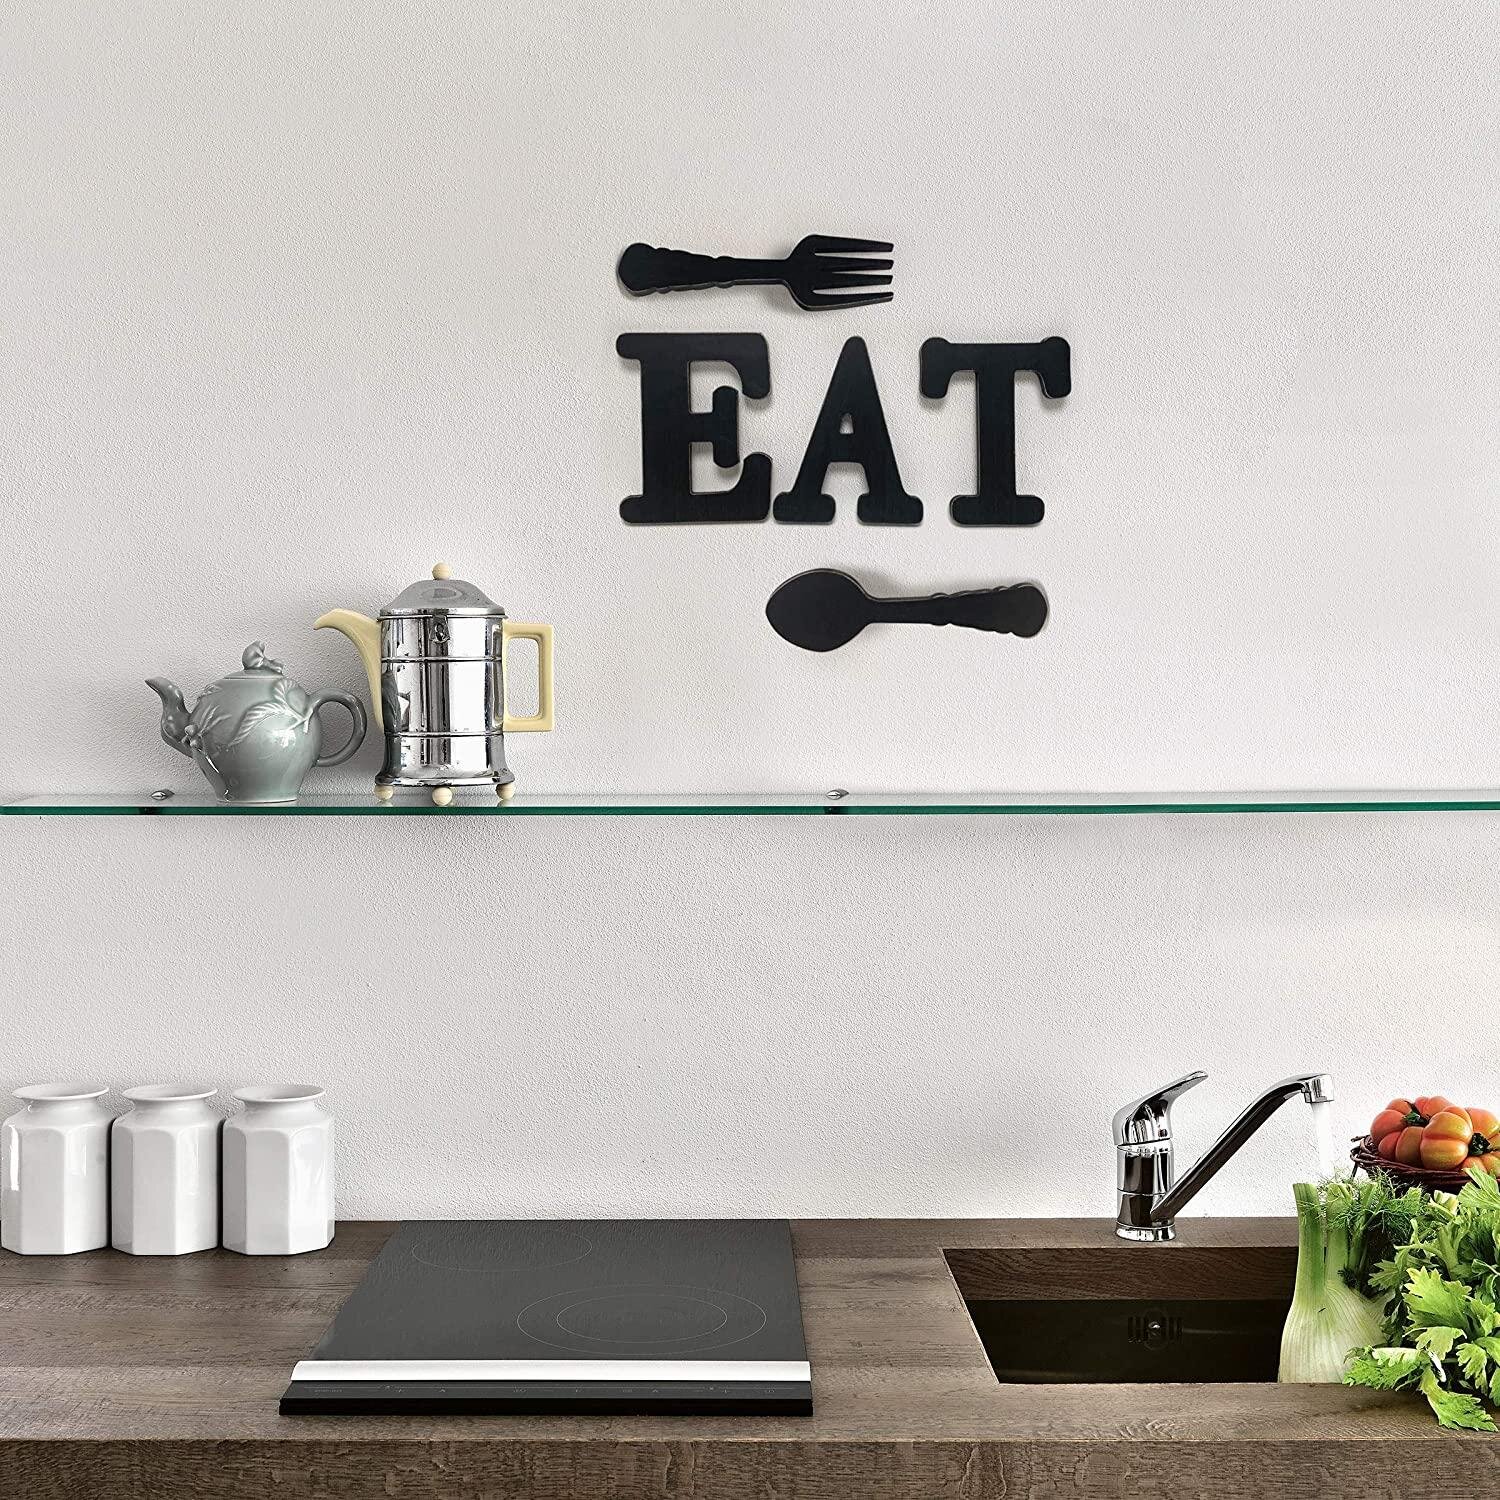 Jetec Eat Wood Sign Eat Sign Decor with Fork and Spoon Patterns for Kitchen Rustic Farmhouse Decoration Family Home Dining Room 